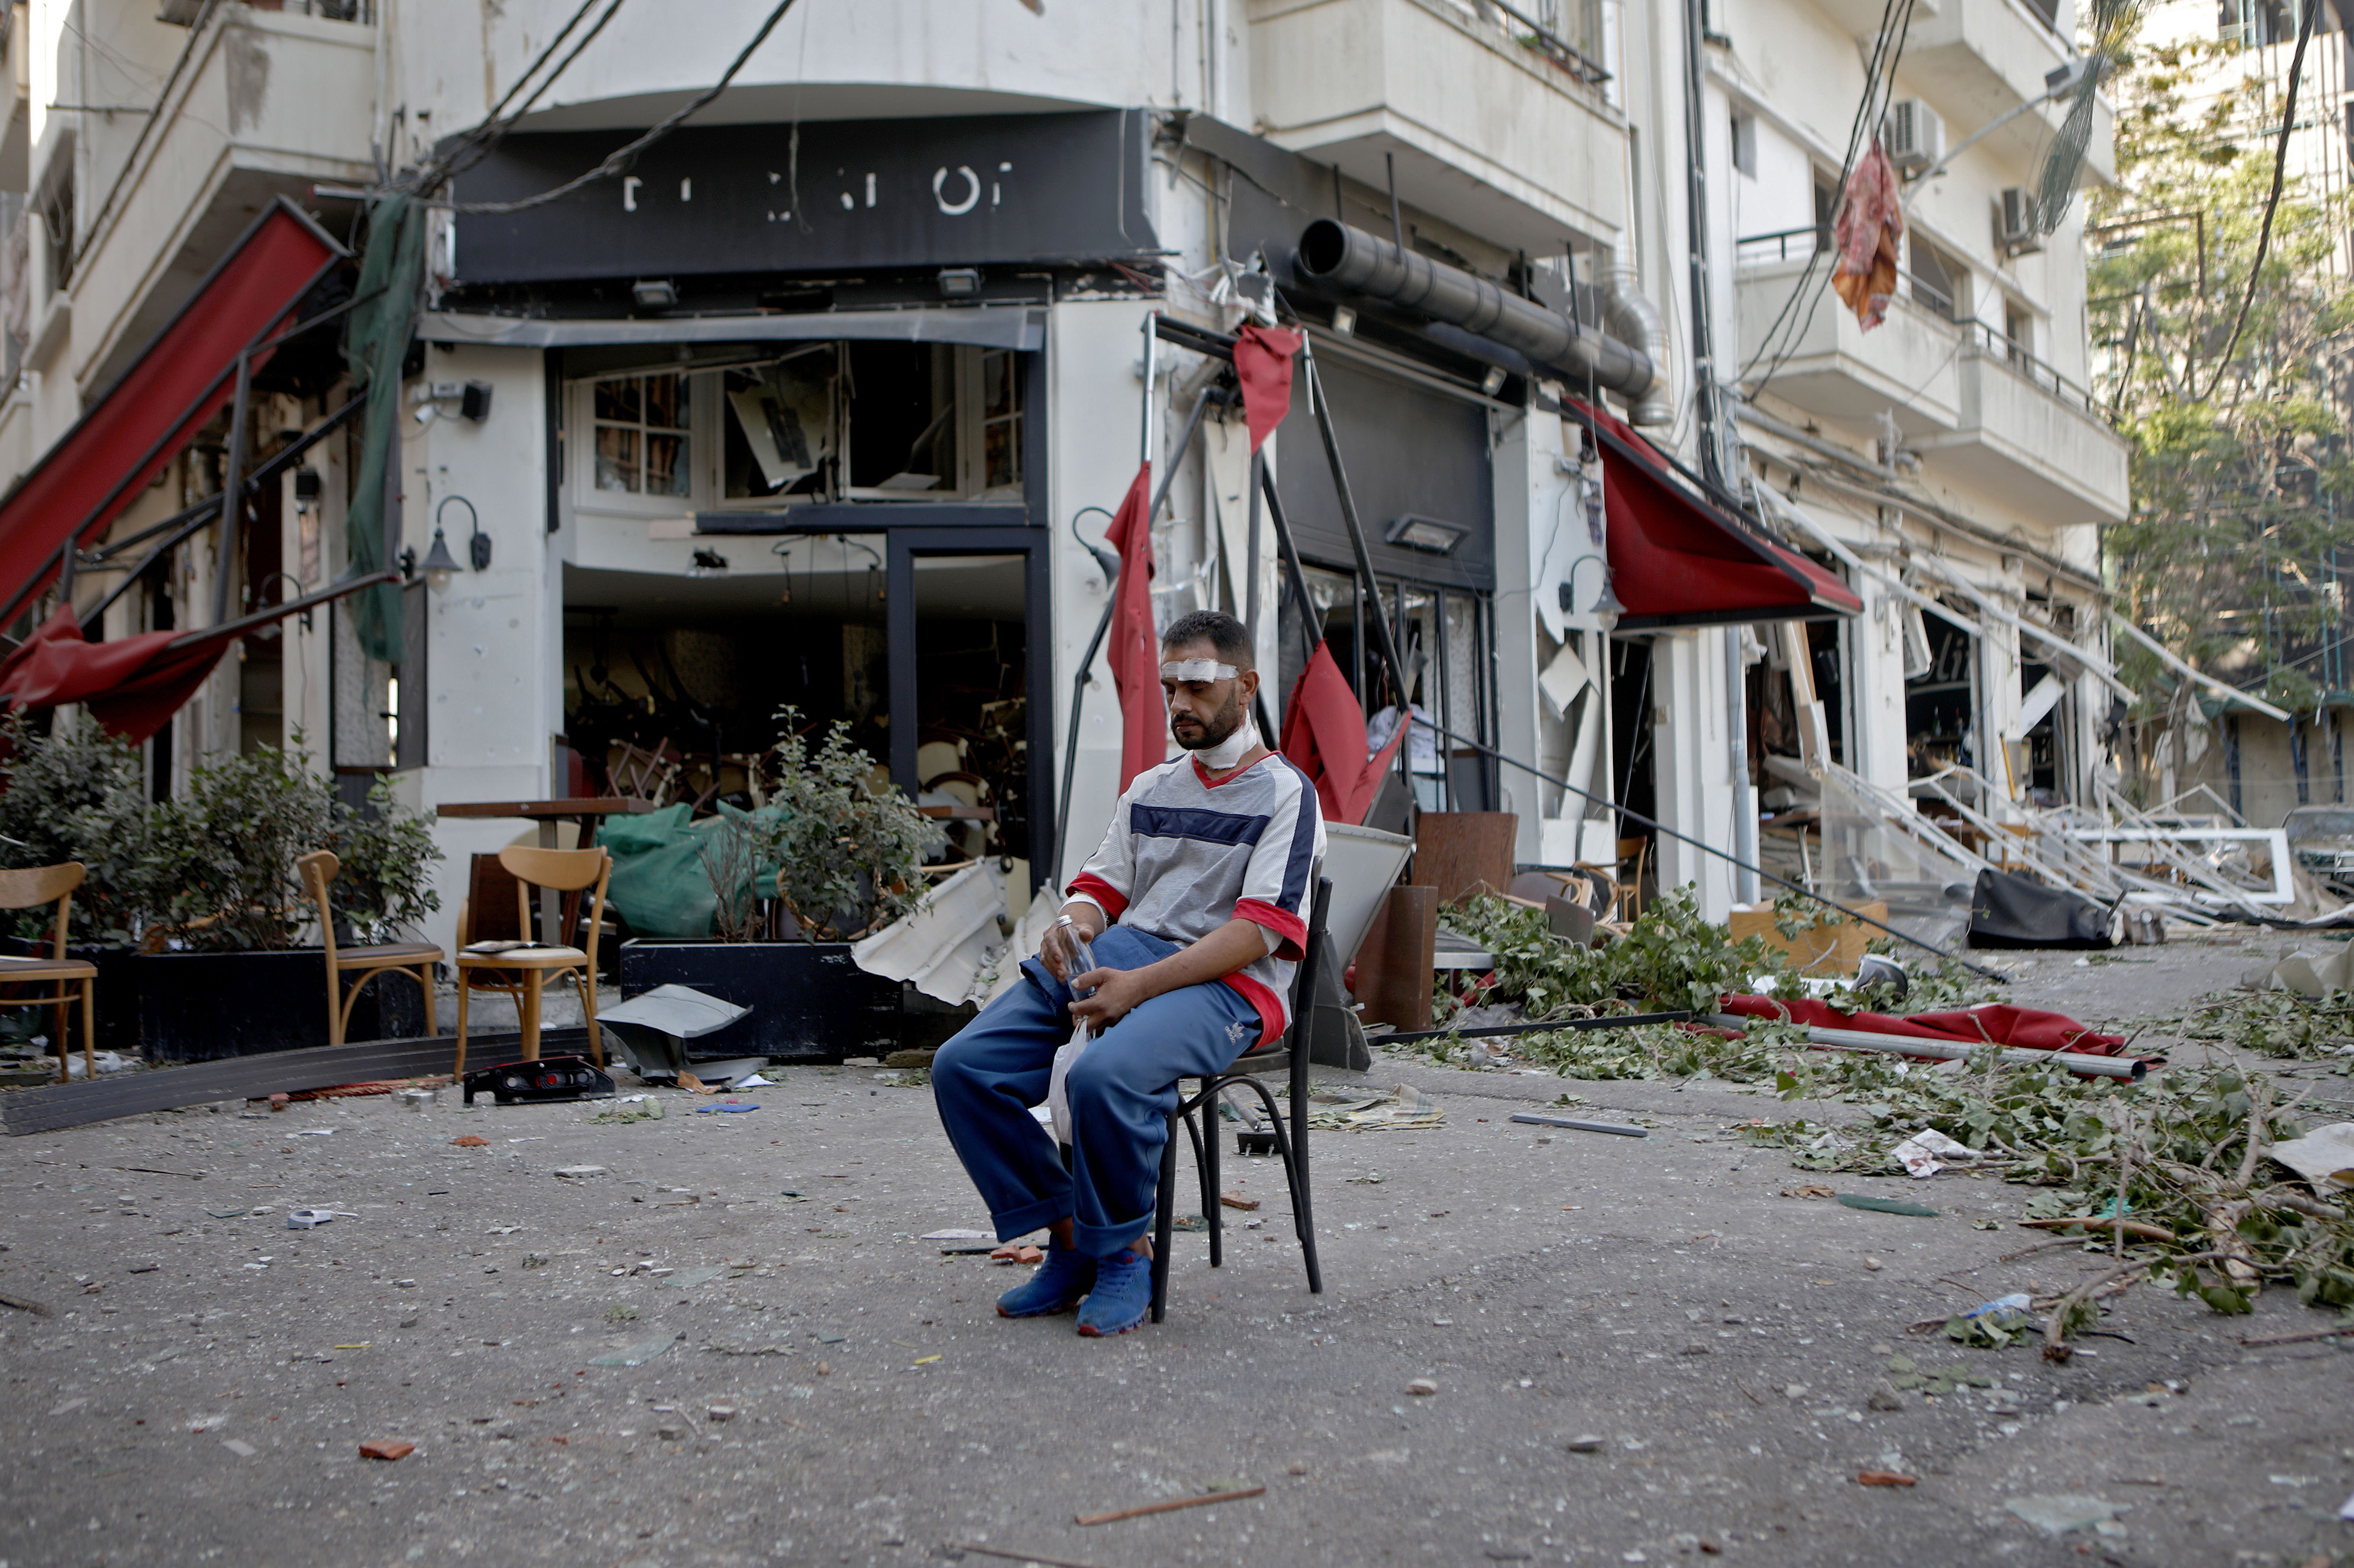 An injured person sits by a restaurant on August 5.